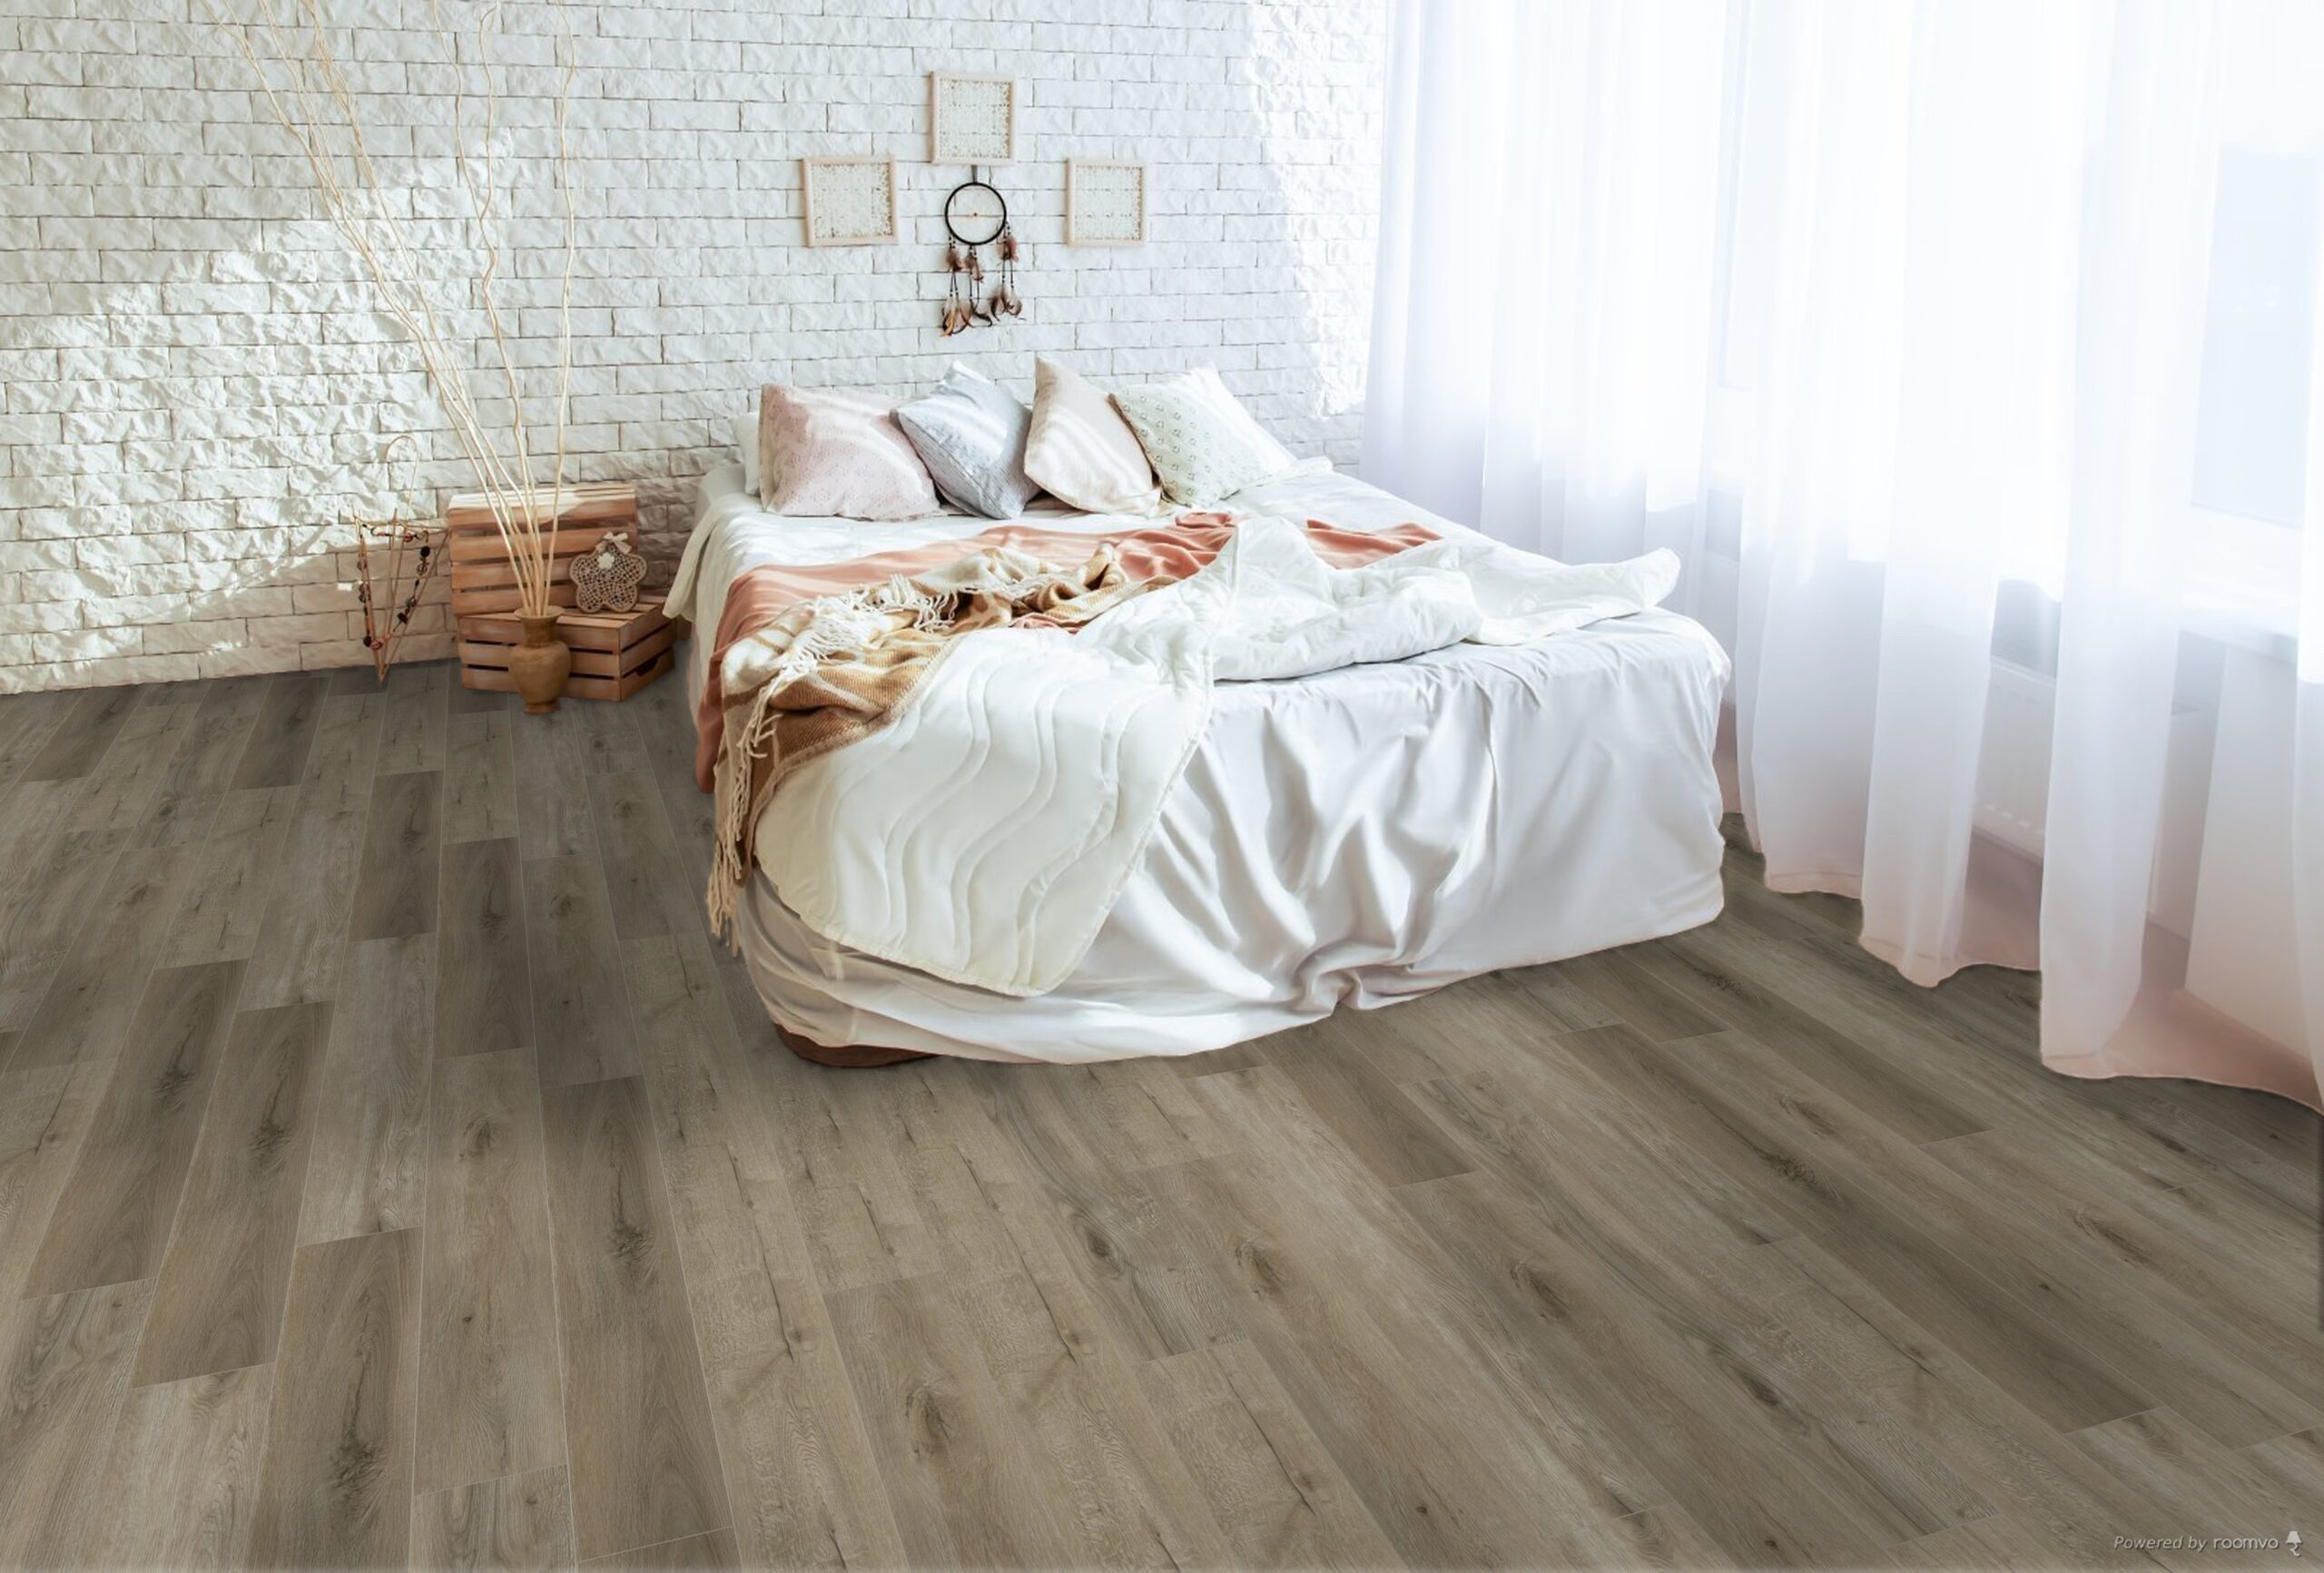 Horizen Flooring presents to you a picture of a quality wide plank Telluride luxury vinyl plank. NovoCore Premium EIR collection features a wide range of colors & designs that will compliment any interior. Natural wood grain synchronized surface allow for an authentic hardwood look & feel. This collection features a 0.25″ / 6.5 mm overall thickness and a durable 22 mil / 0.55 mm wear layer for residential and commercial applications.